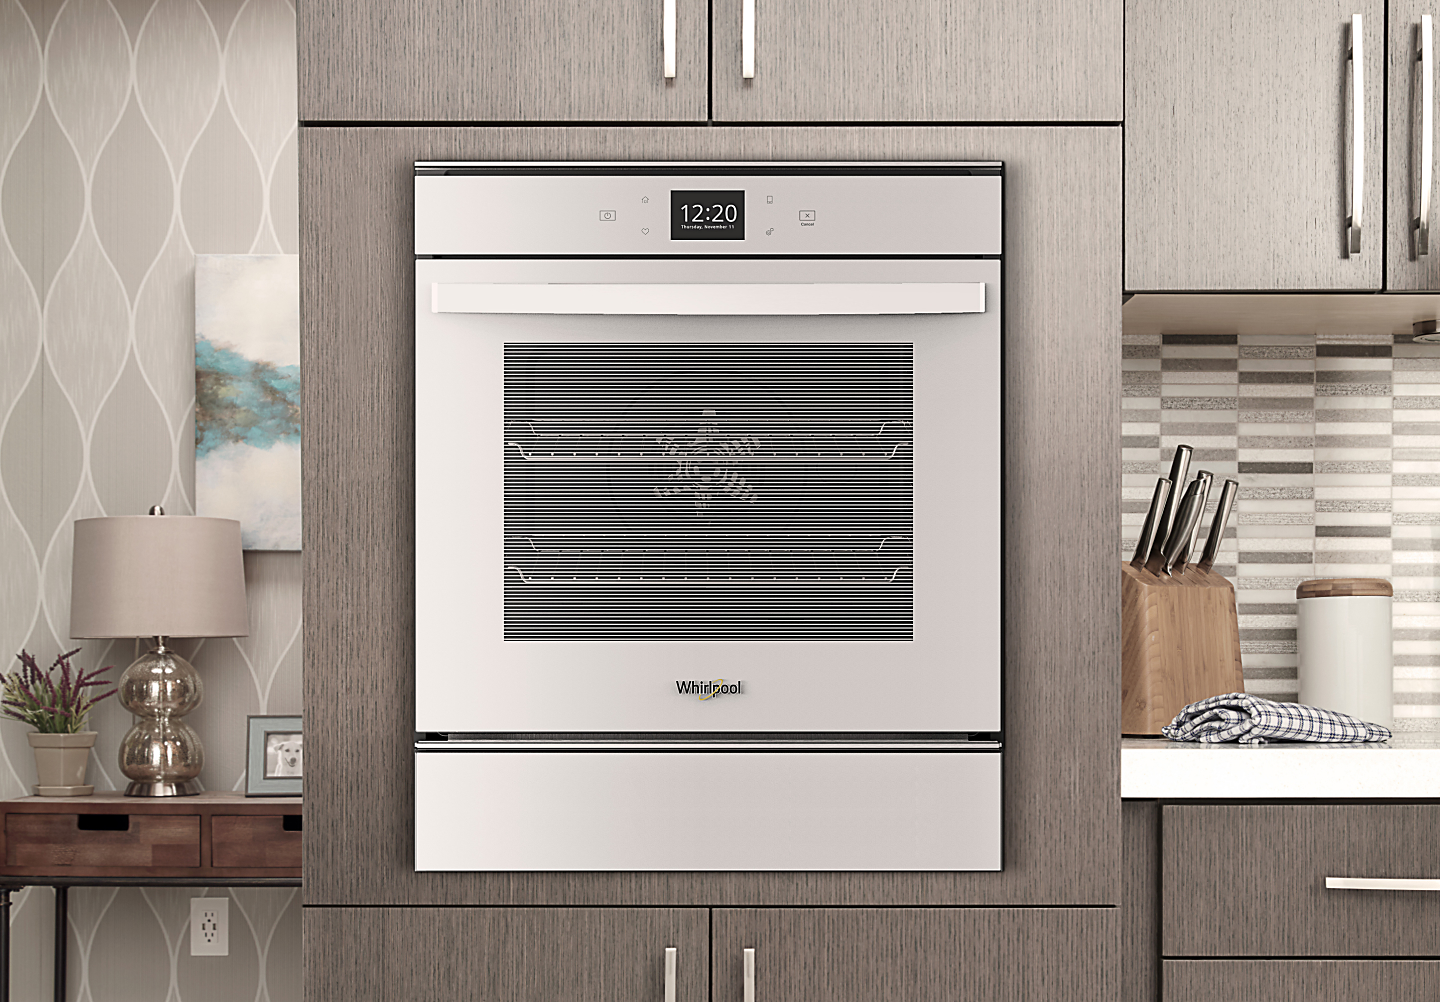 Convection Vs. Conventional Oven: What's The Difference?